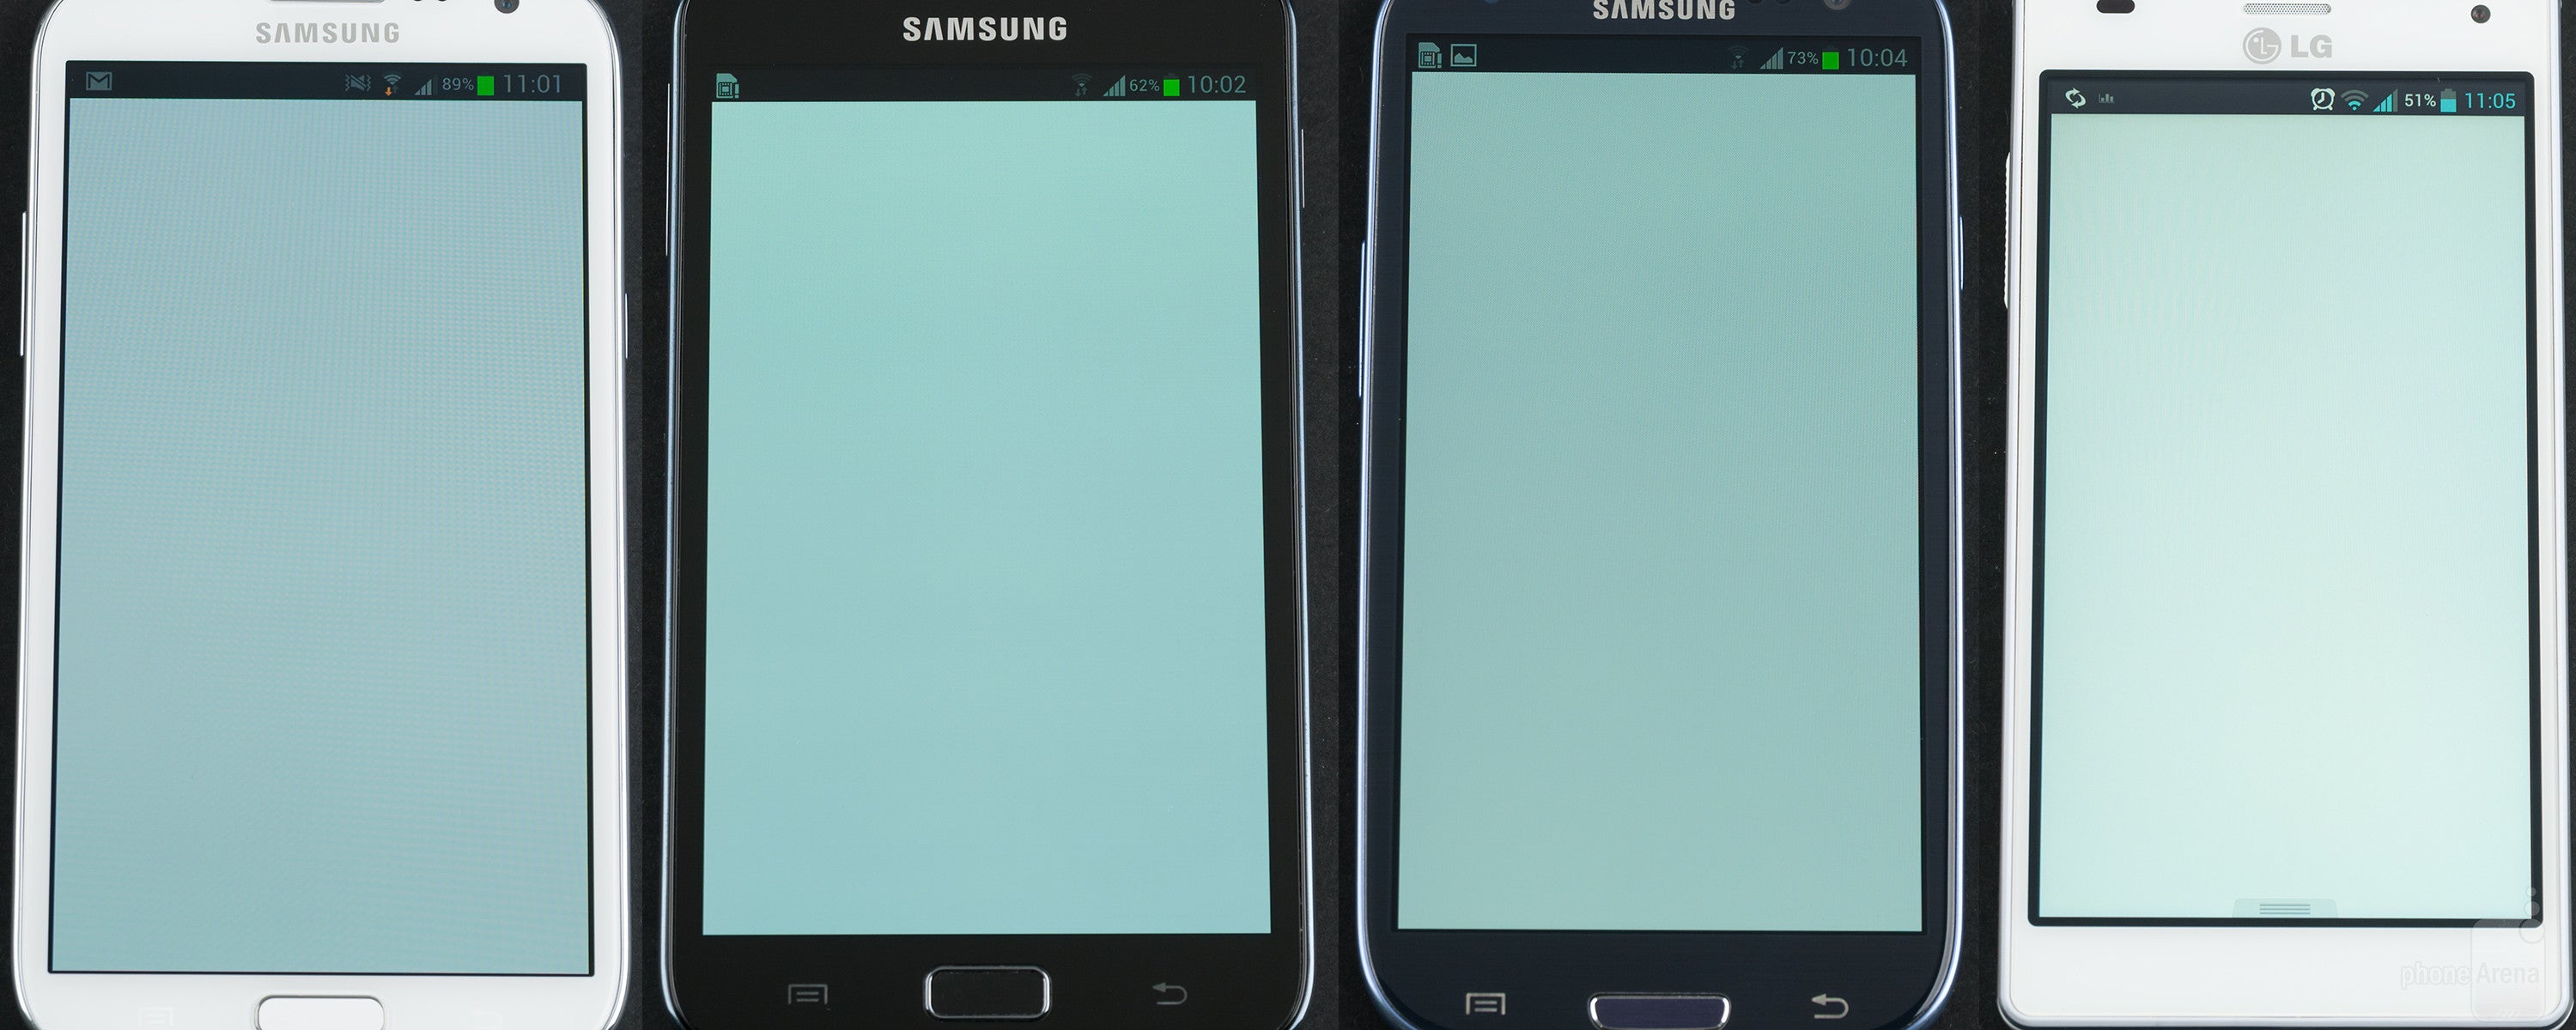 Left to right - Samsung Galaxy Note II, Samsung Galaxy Note, Samsung Galaxy S III, LG Optimus 4X HD - Samsung Galaxy Note II Review